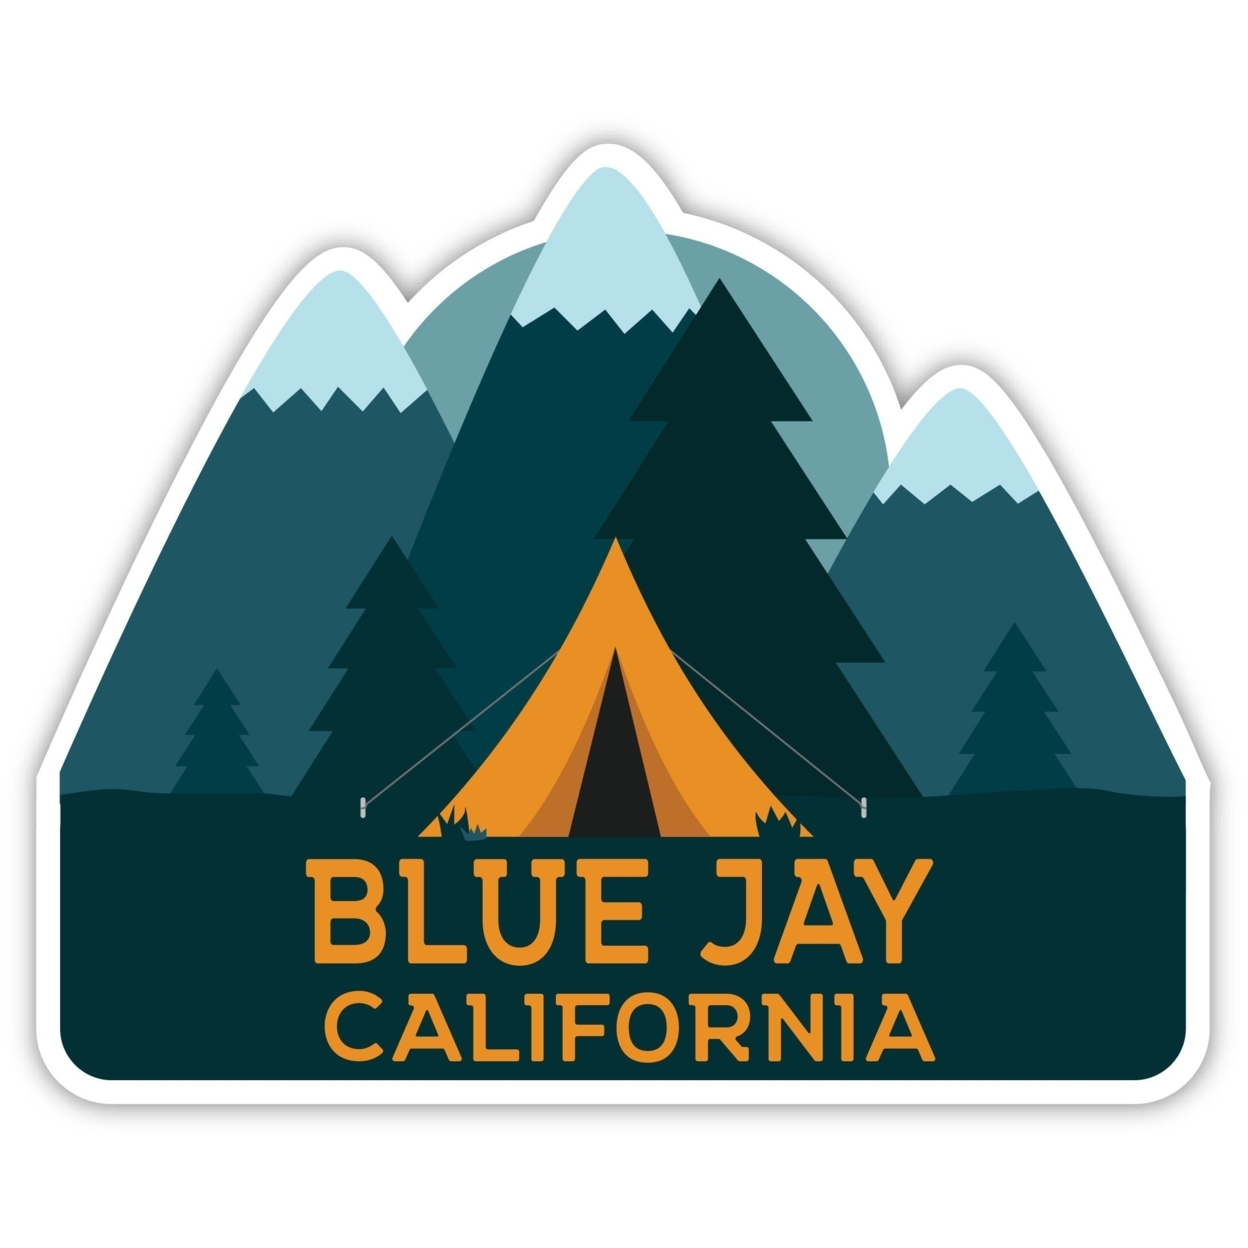 Blue Jay California Souvenir Decorative Stickers (Choose Theme And Size) - 4-Pack, 2-Inch, Tent